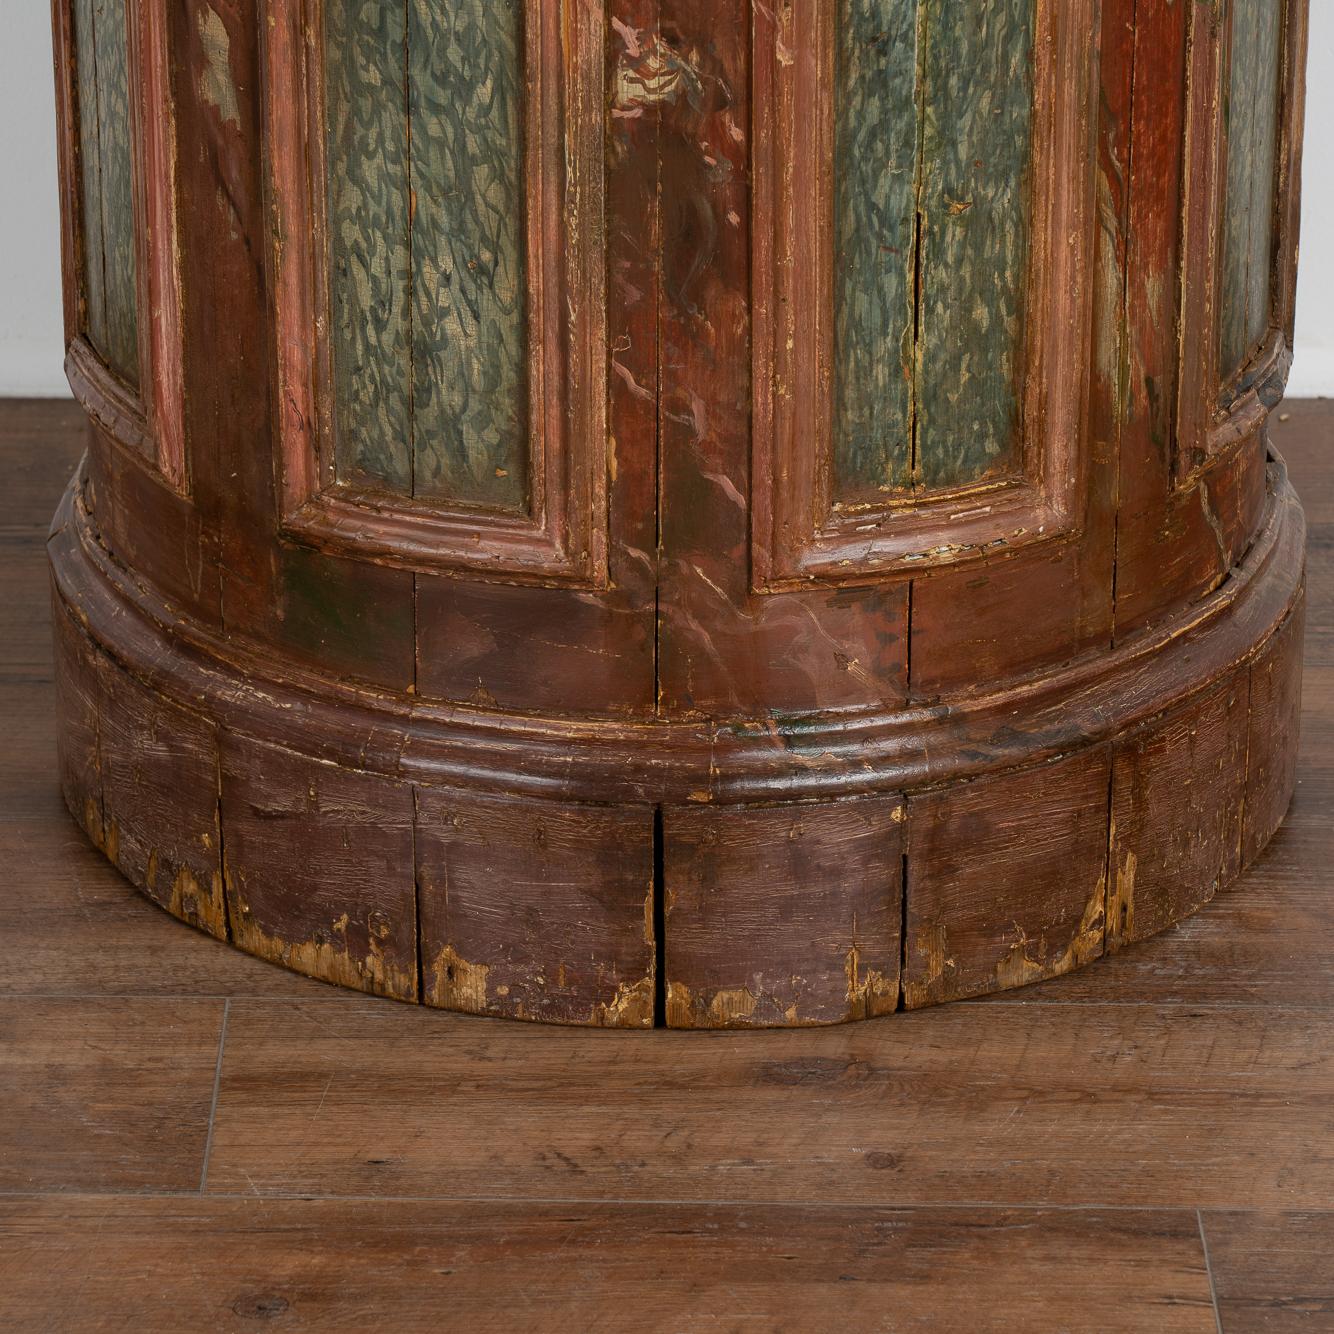 Antique Red Painted Wood Display Pedestal from Sweden, circa 1840-1860 For Sale 3